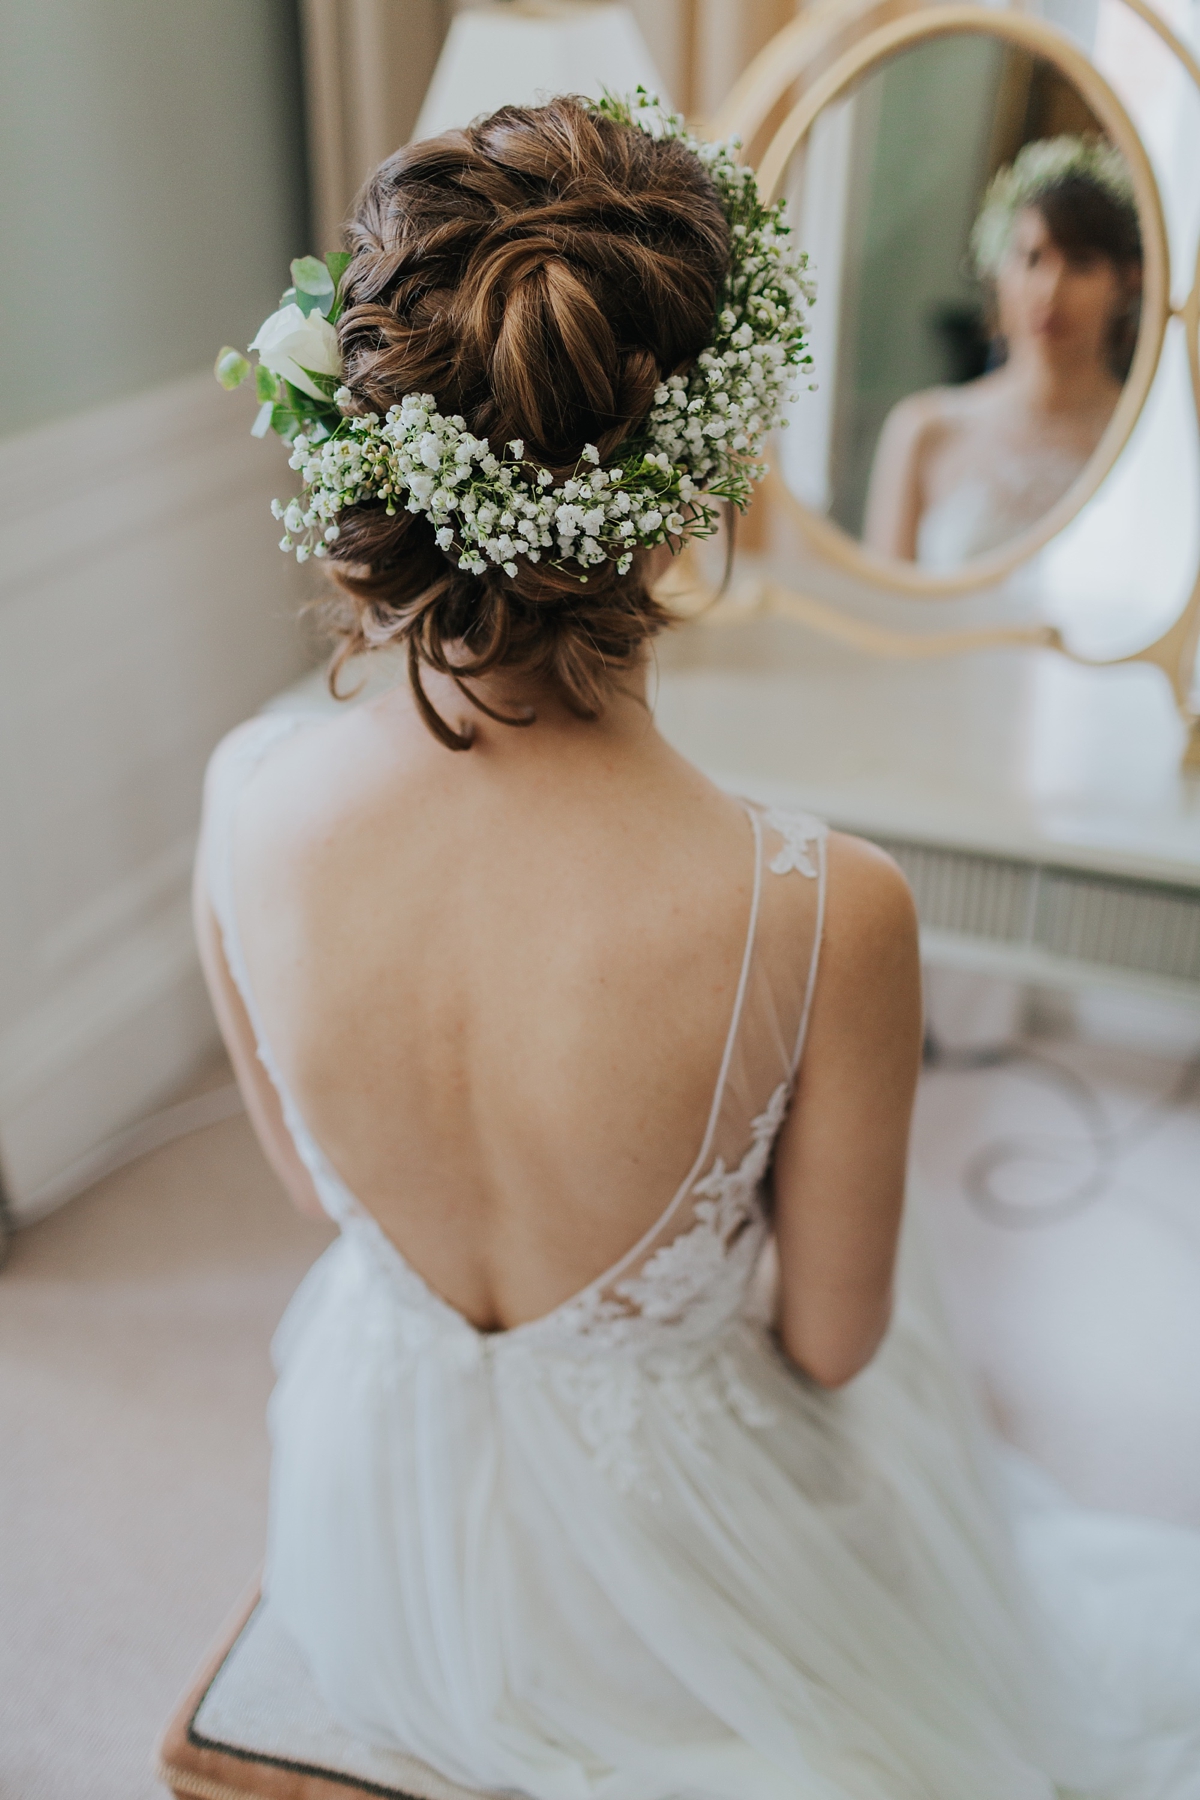 bride looking at herself in the mirror, wearing hair up and baby's breath floral crown